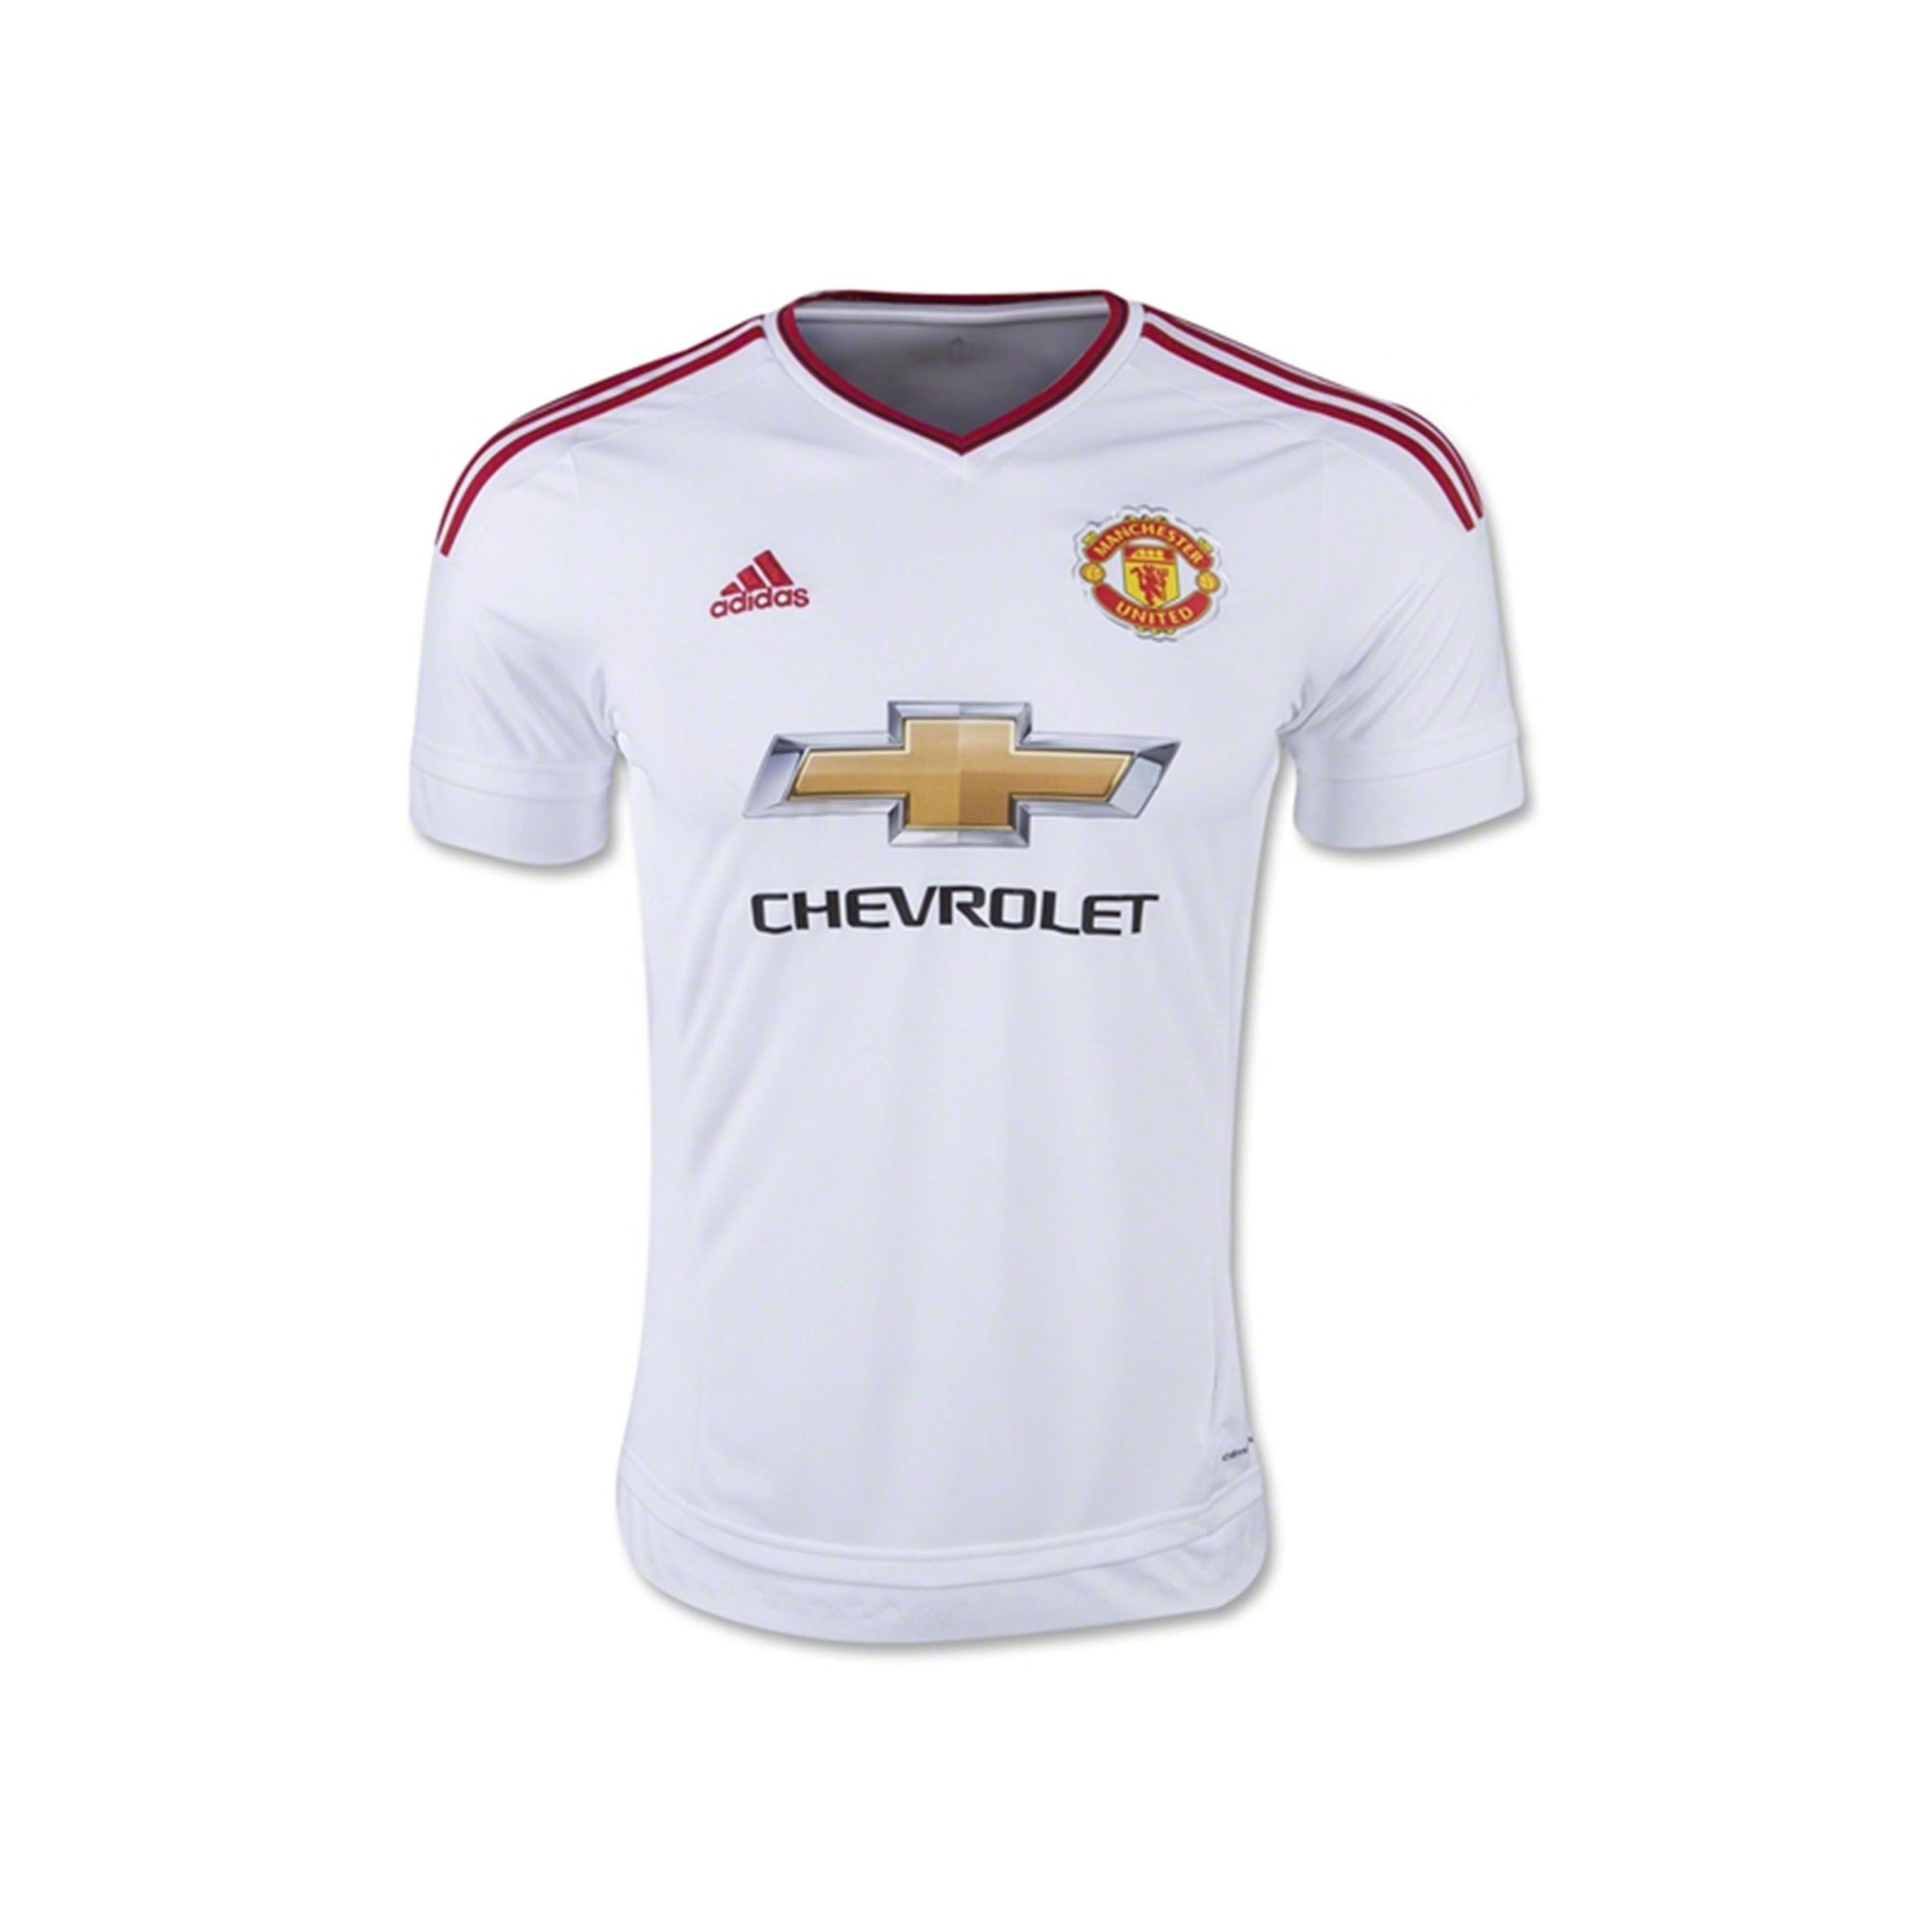 ADIDAS Manchester United FC Away 15/16